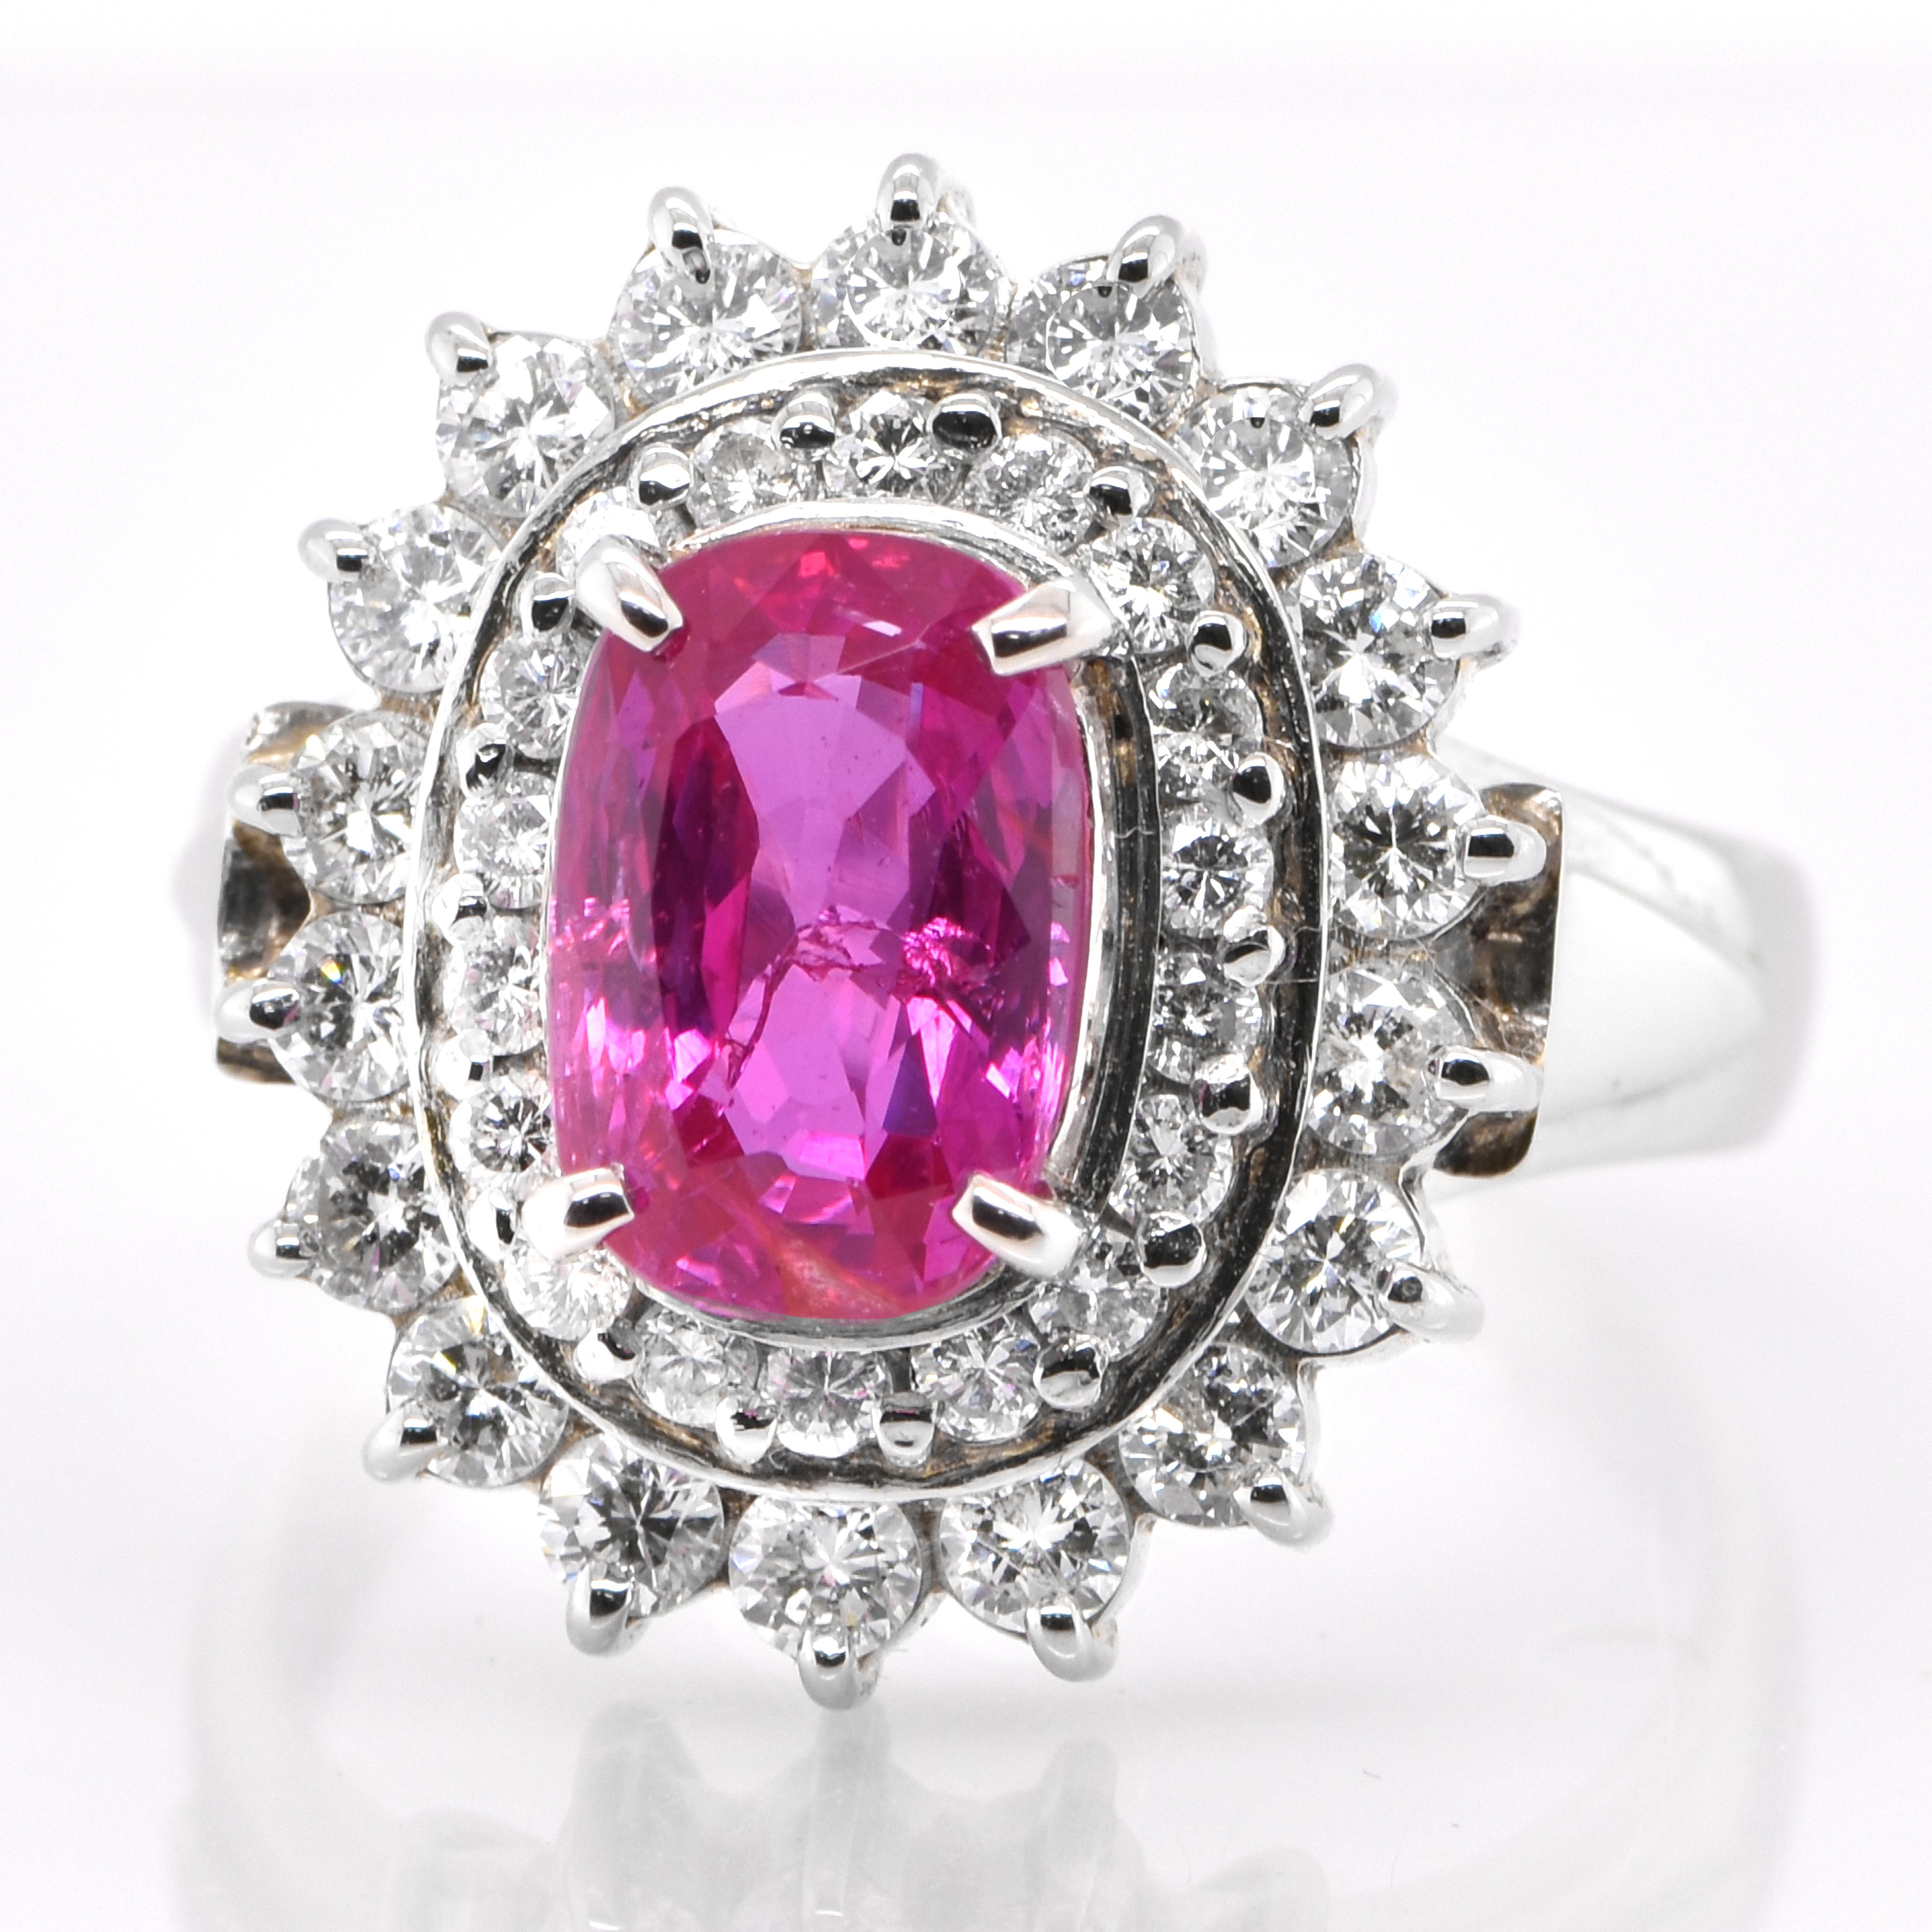 A beautiful ring set in Platinum featuring a GIA Certified 2.58 Carat Natural No Heat (Untreated) Ruby and 0.97 Carat Diamonds. Rubies are referred to as 